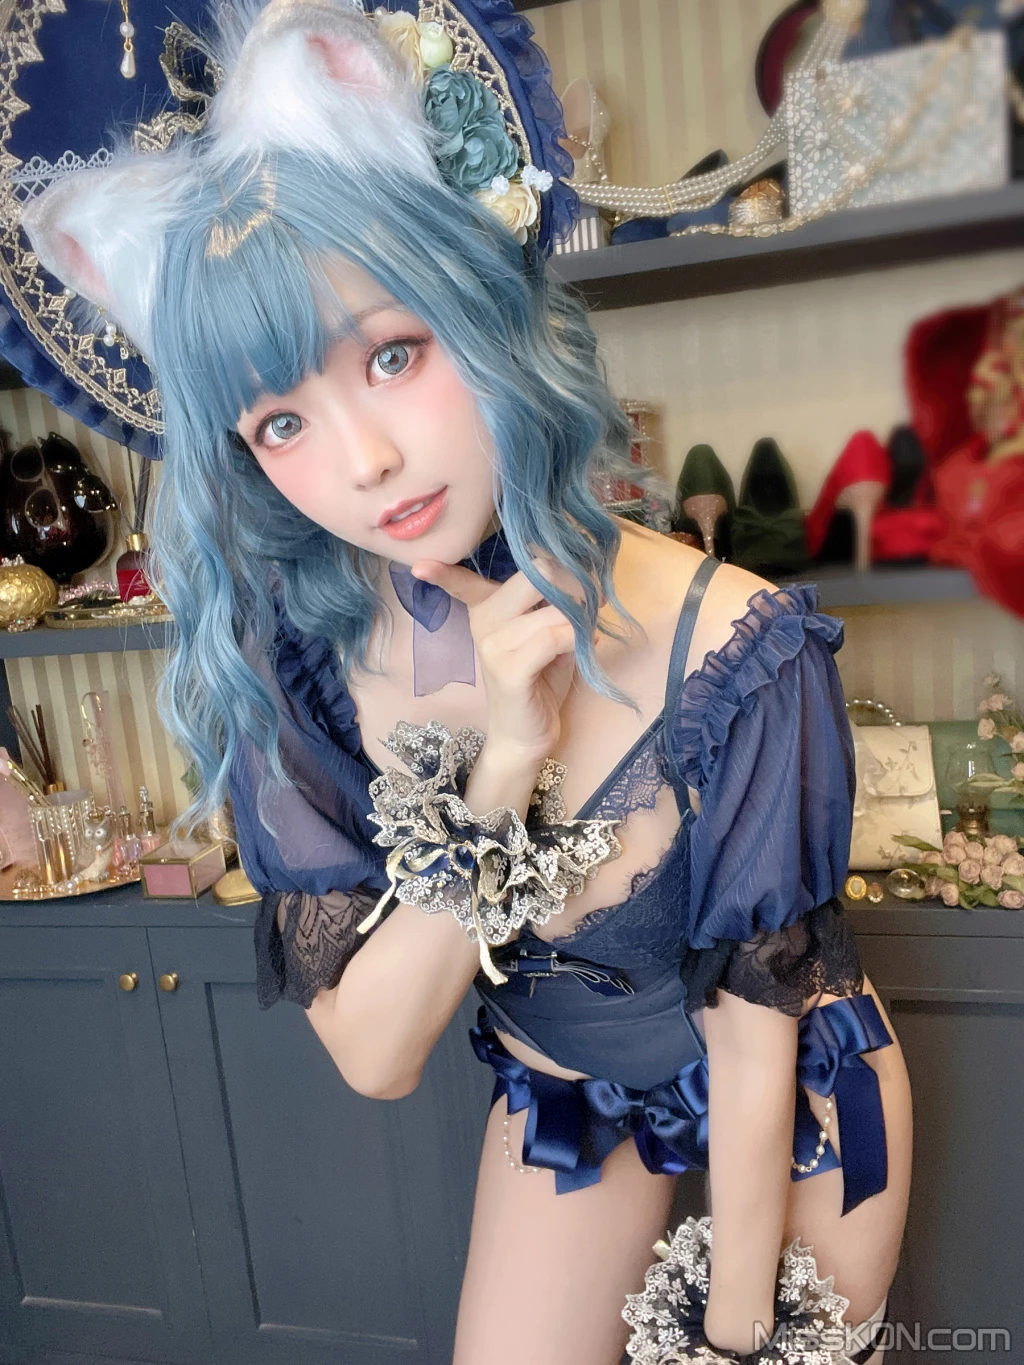 Coser@Ely_eee (ElyEE子): Scottish Fold Cat Doll (摺耳貓少女人形) (60 photos)  photo 1-4